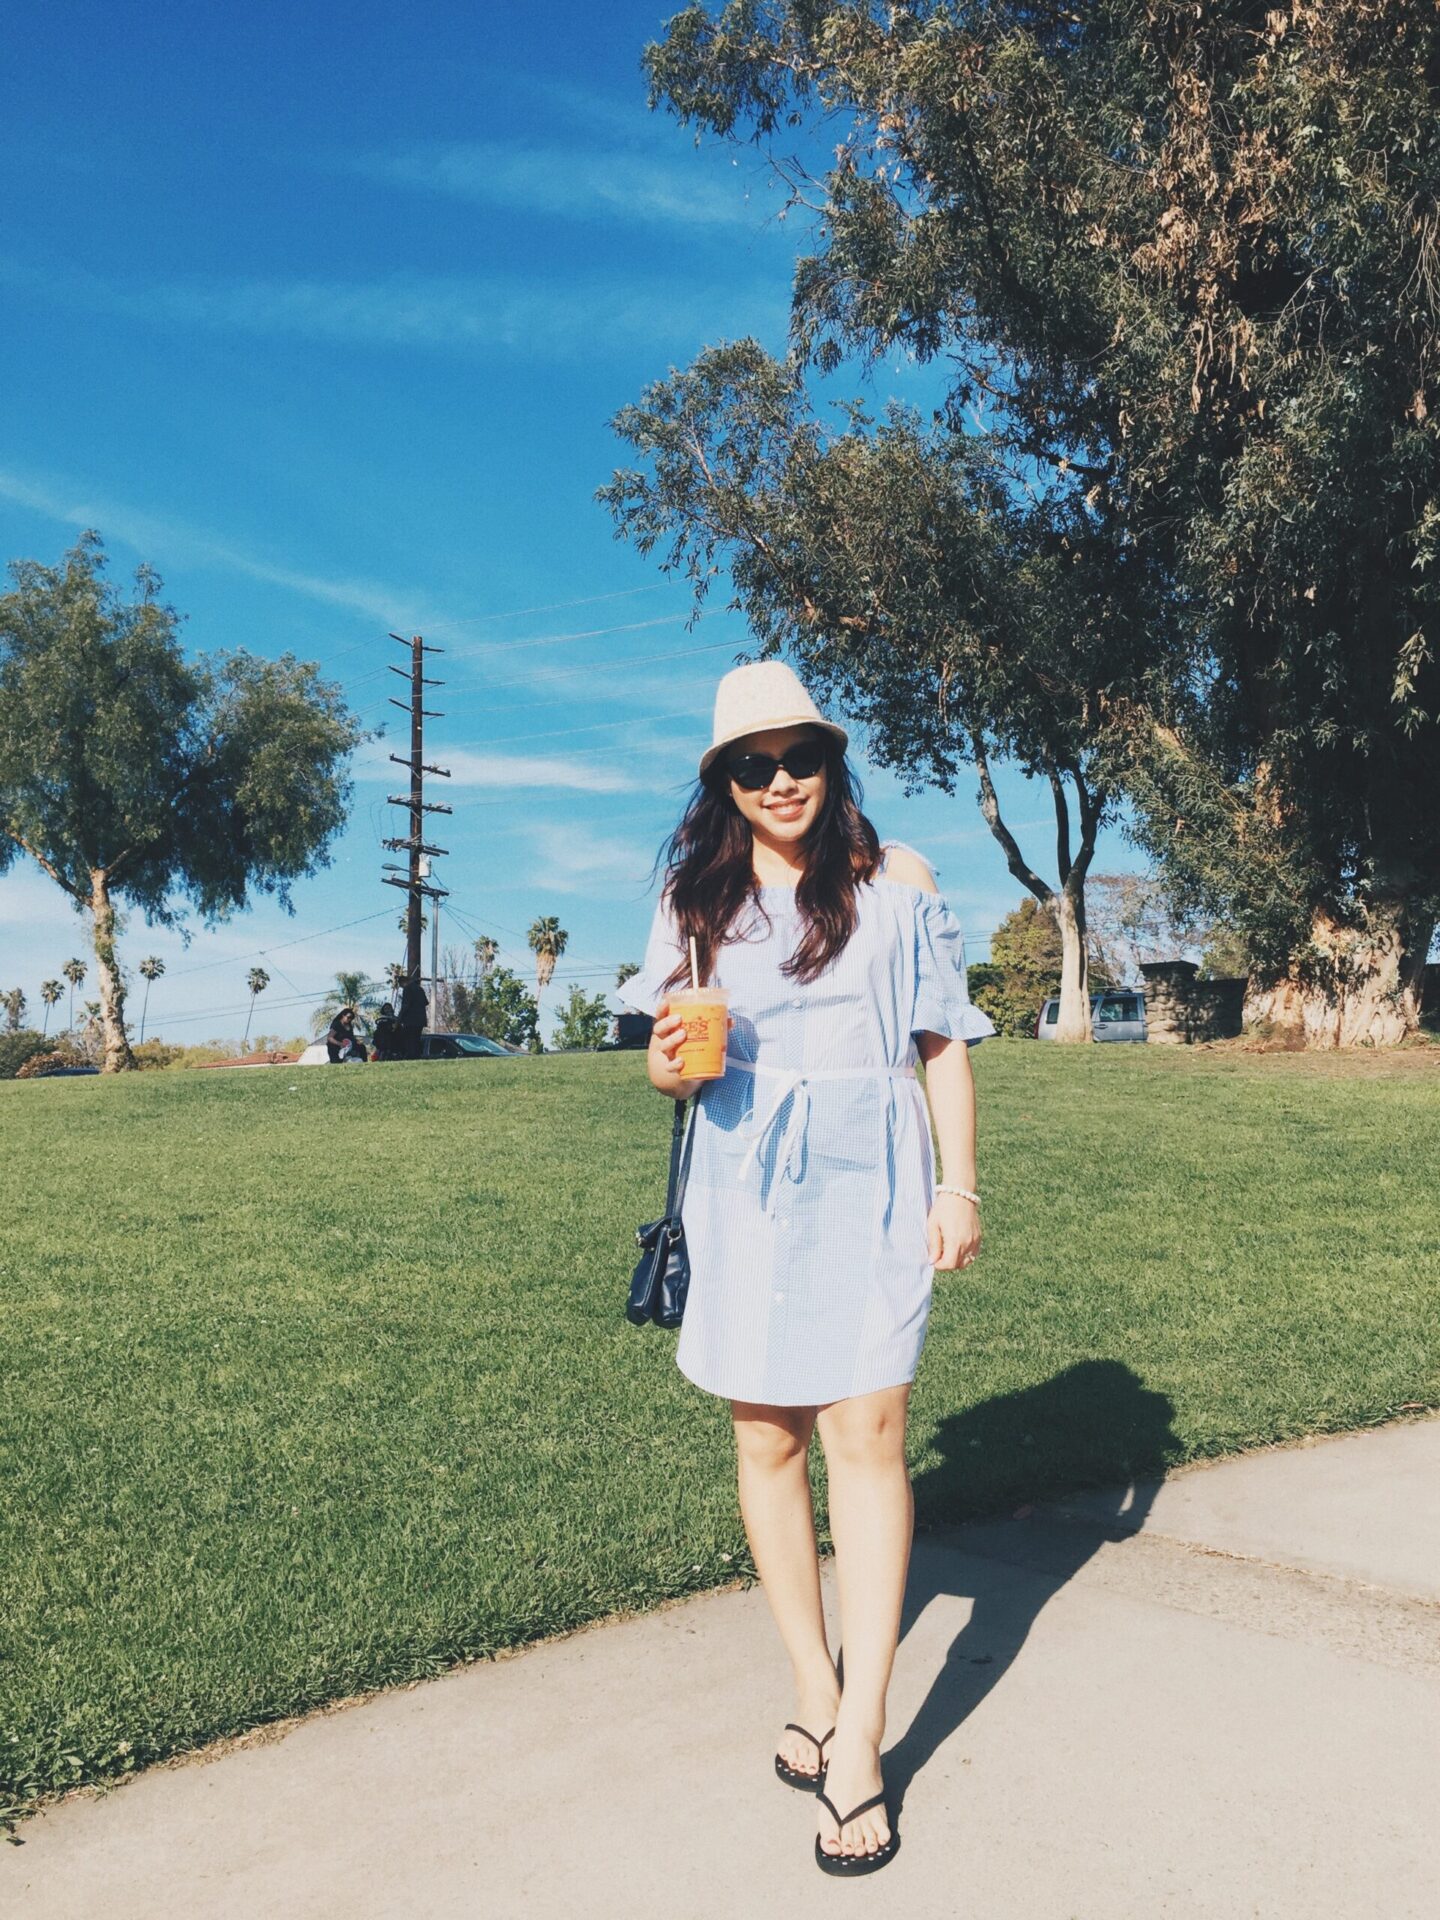 Instagram: @pslilyboutique, Pinterest, Los Angeles fashion blogger, top fashion blog, best fashion blog, fashion & personal style blog, travel blog, travel blogger, LA fashion blogger, fashion blogger of PSLily Boutique, Spring Day, Spring 2018 outfit ideas, Blue & White Gingham Buffalo David Bitton Dress, 5.10.18,